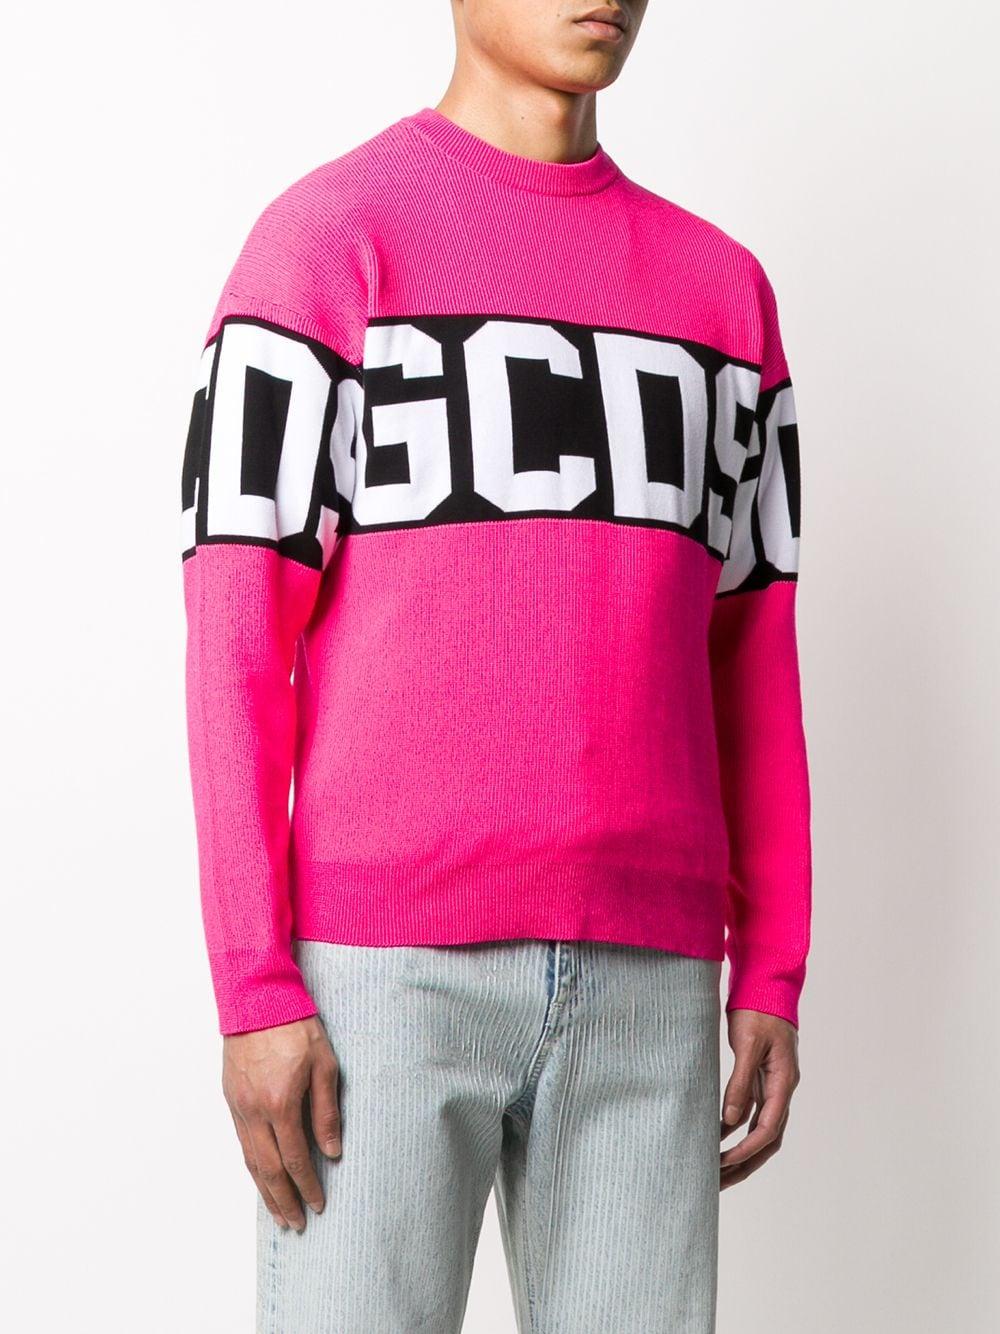 Gcds Cotton Stitched Logo Jumper in Pink for Men - Lyst